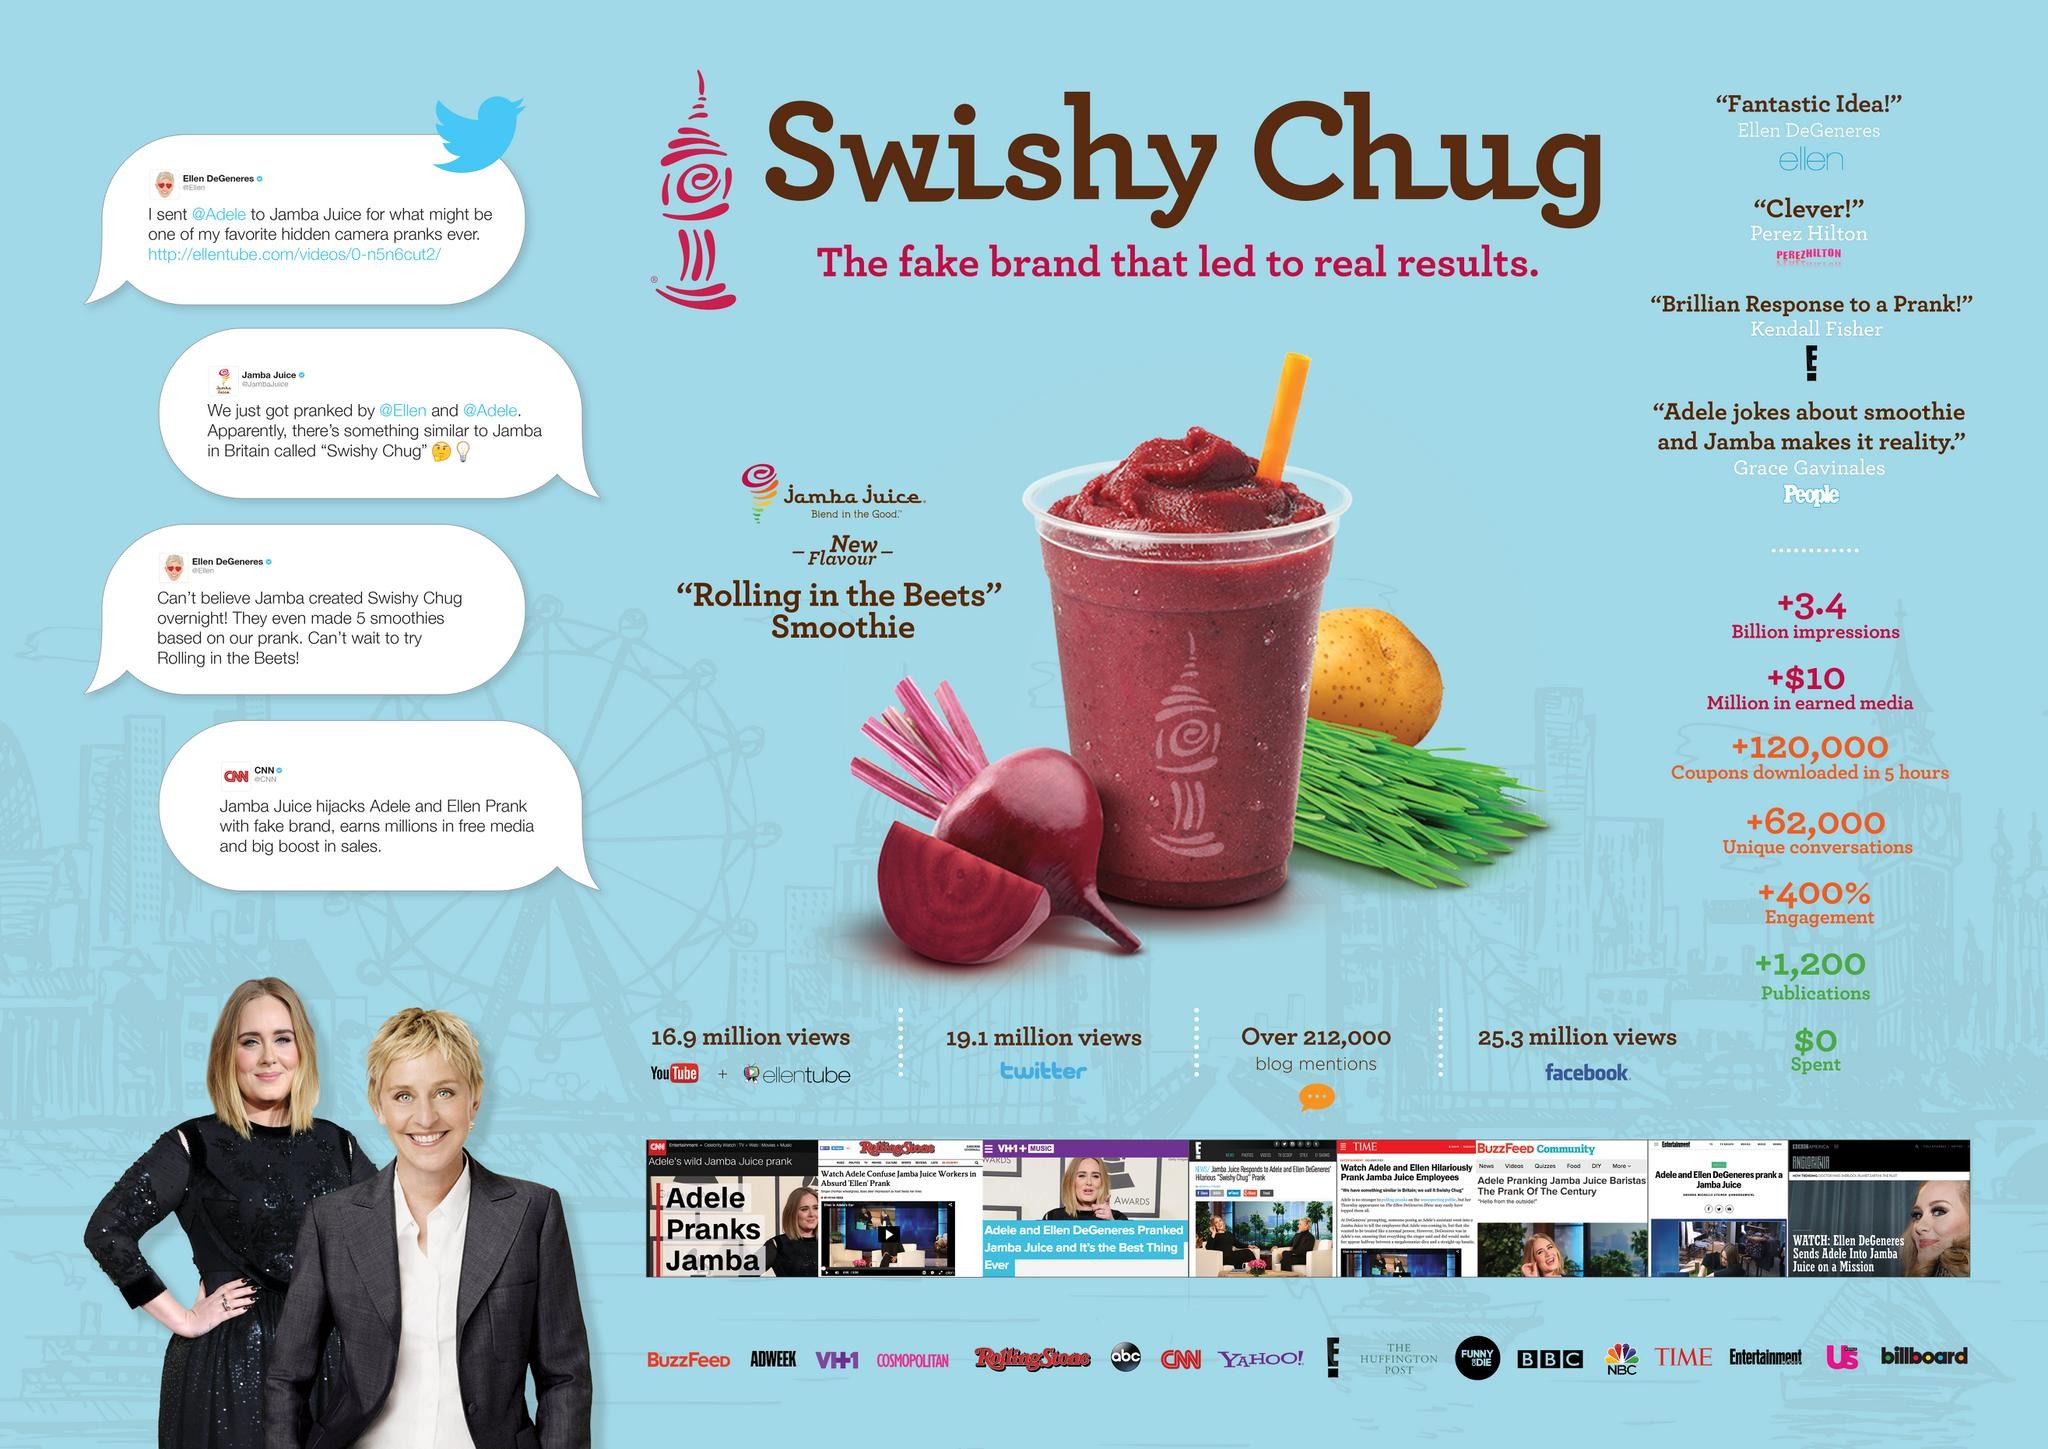 Swishy Chug: The Fake Brand that Led to Real Results.